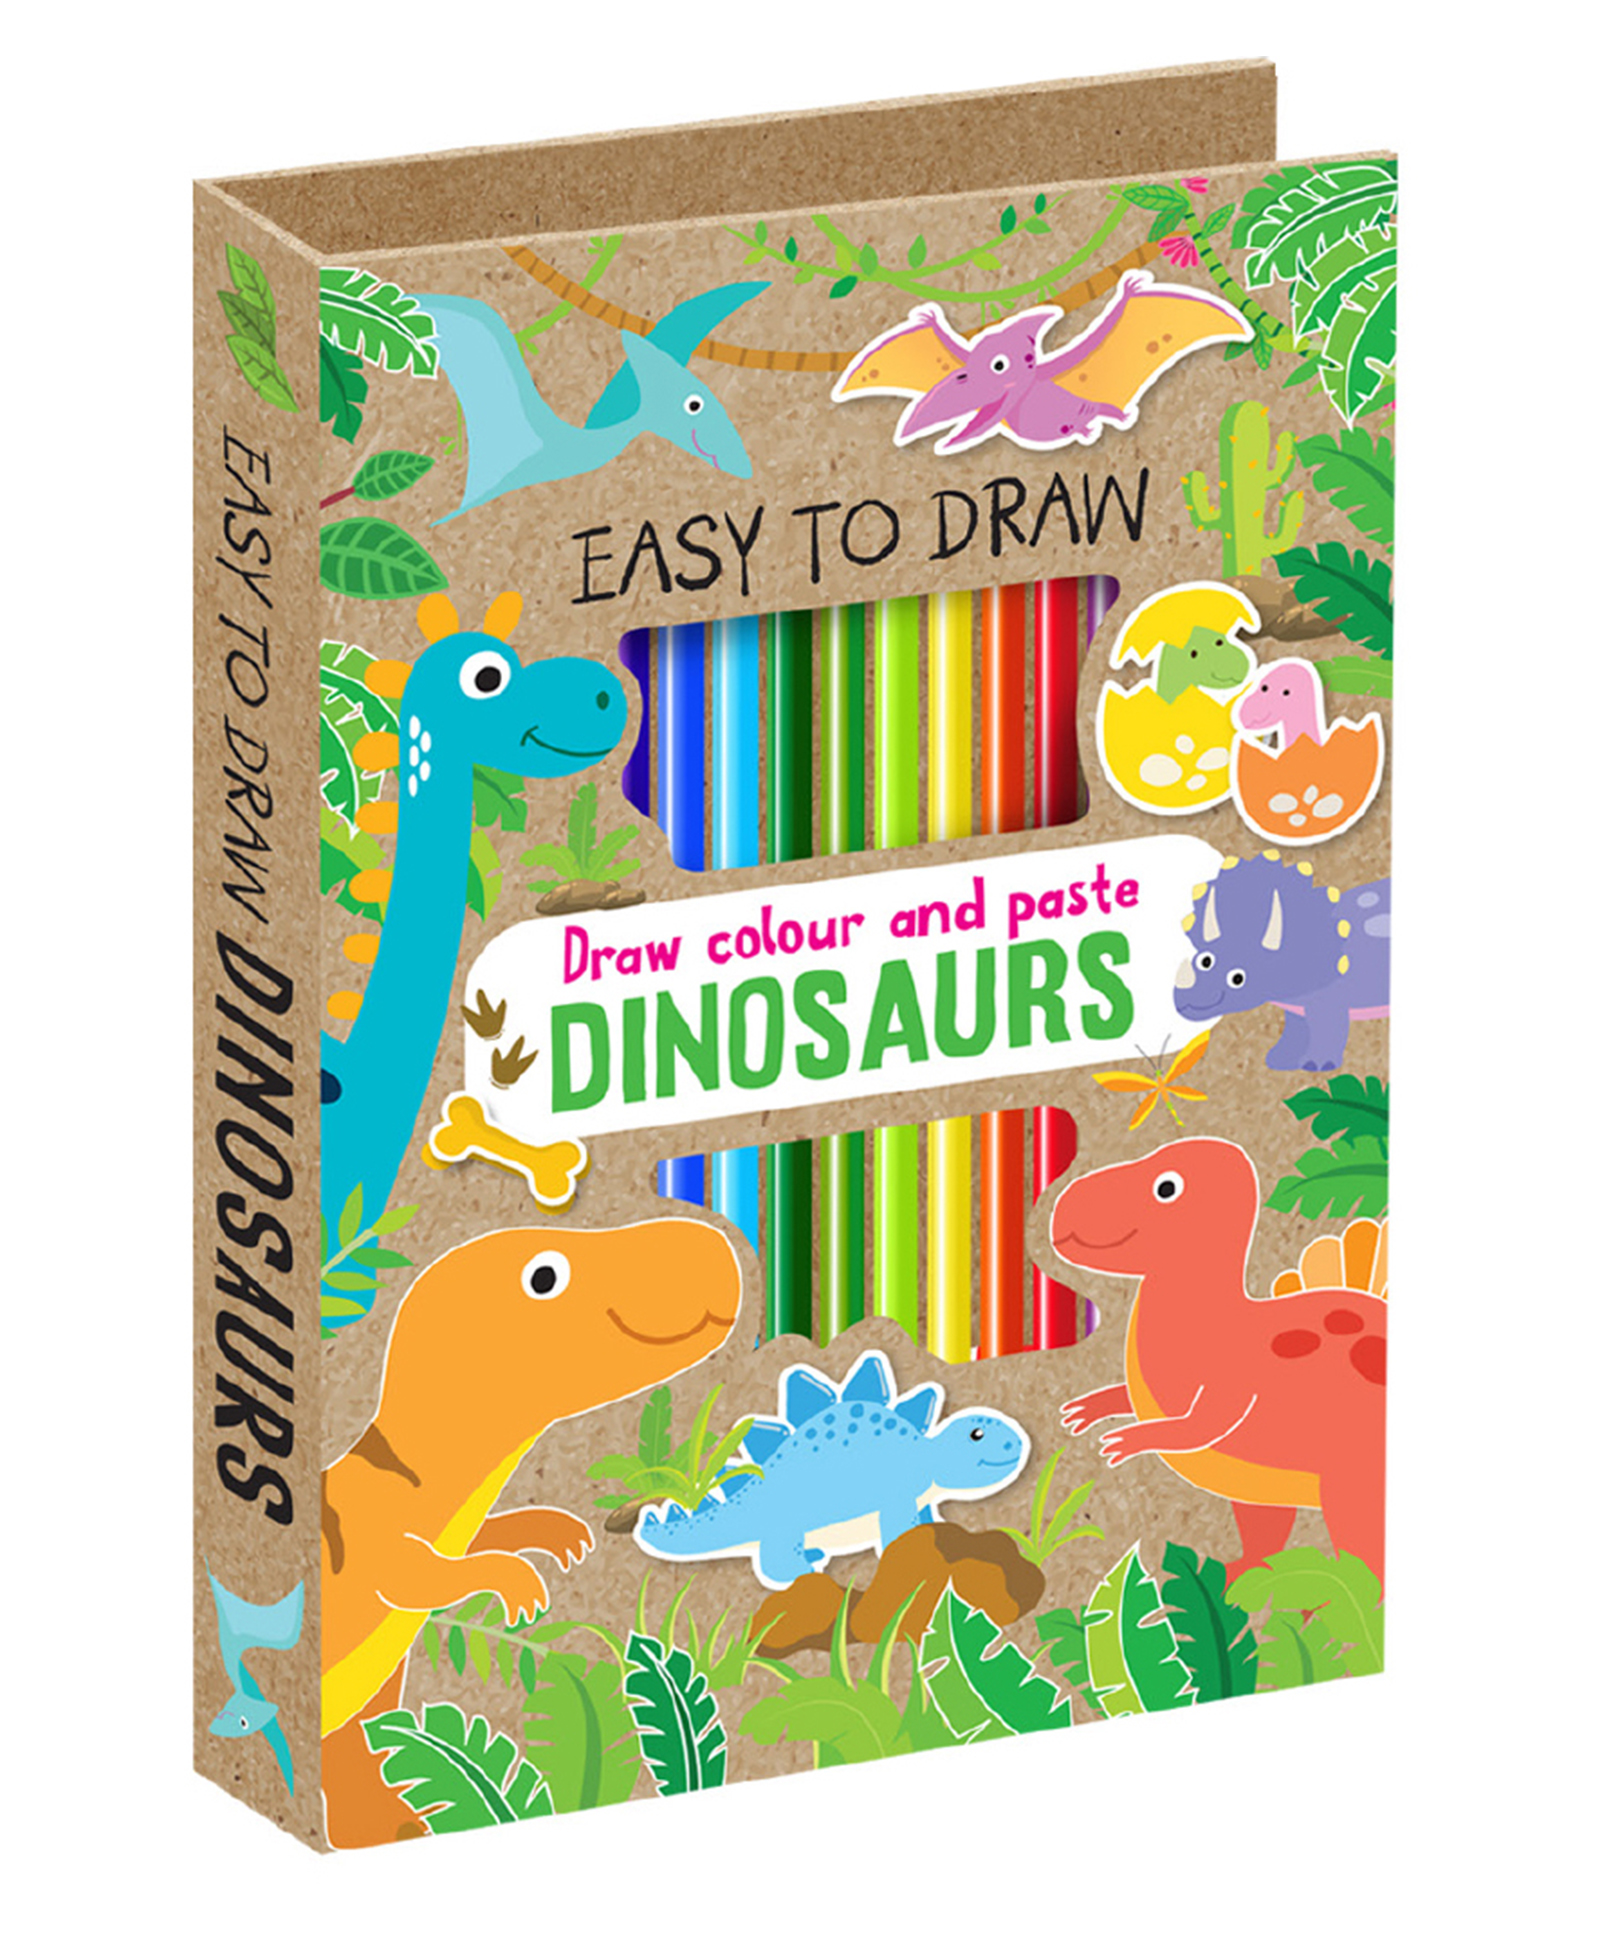 Dinosaurs Easy to Draw Art and Craft Kit